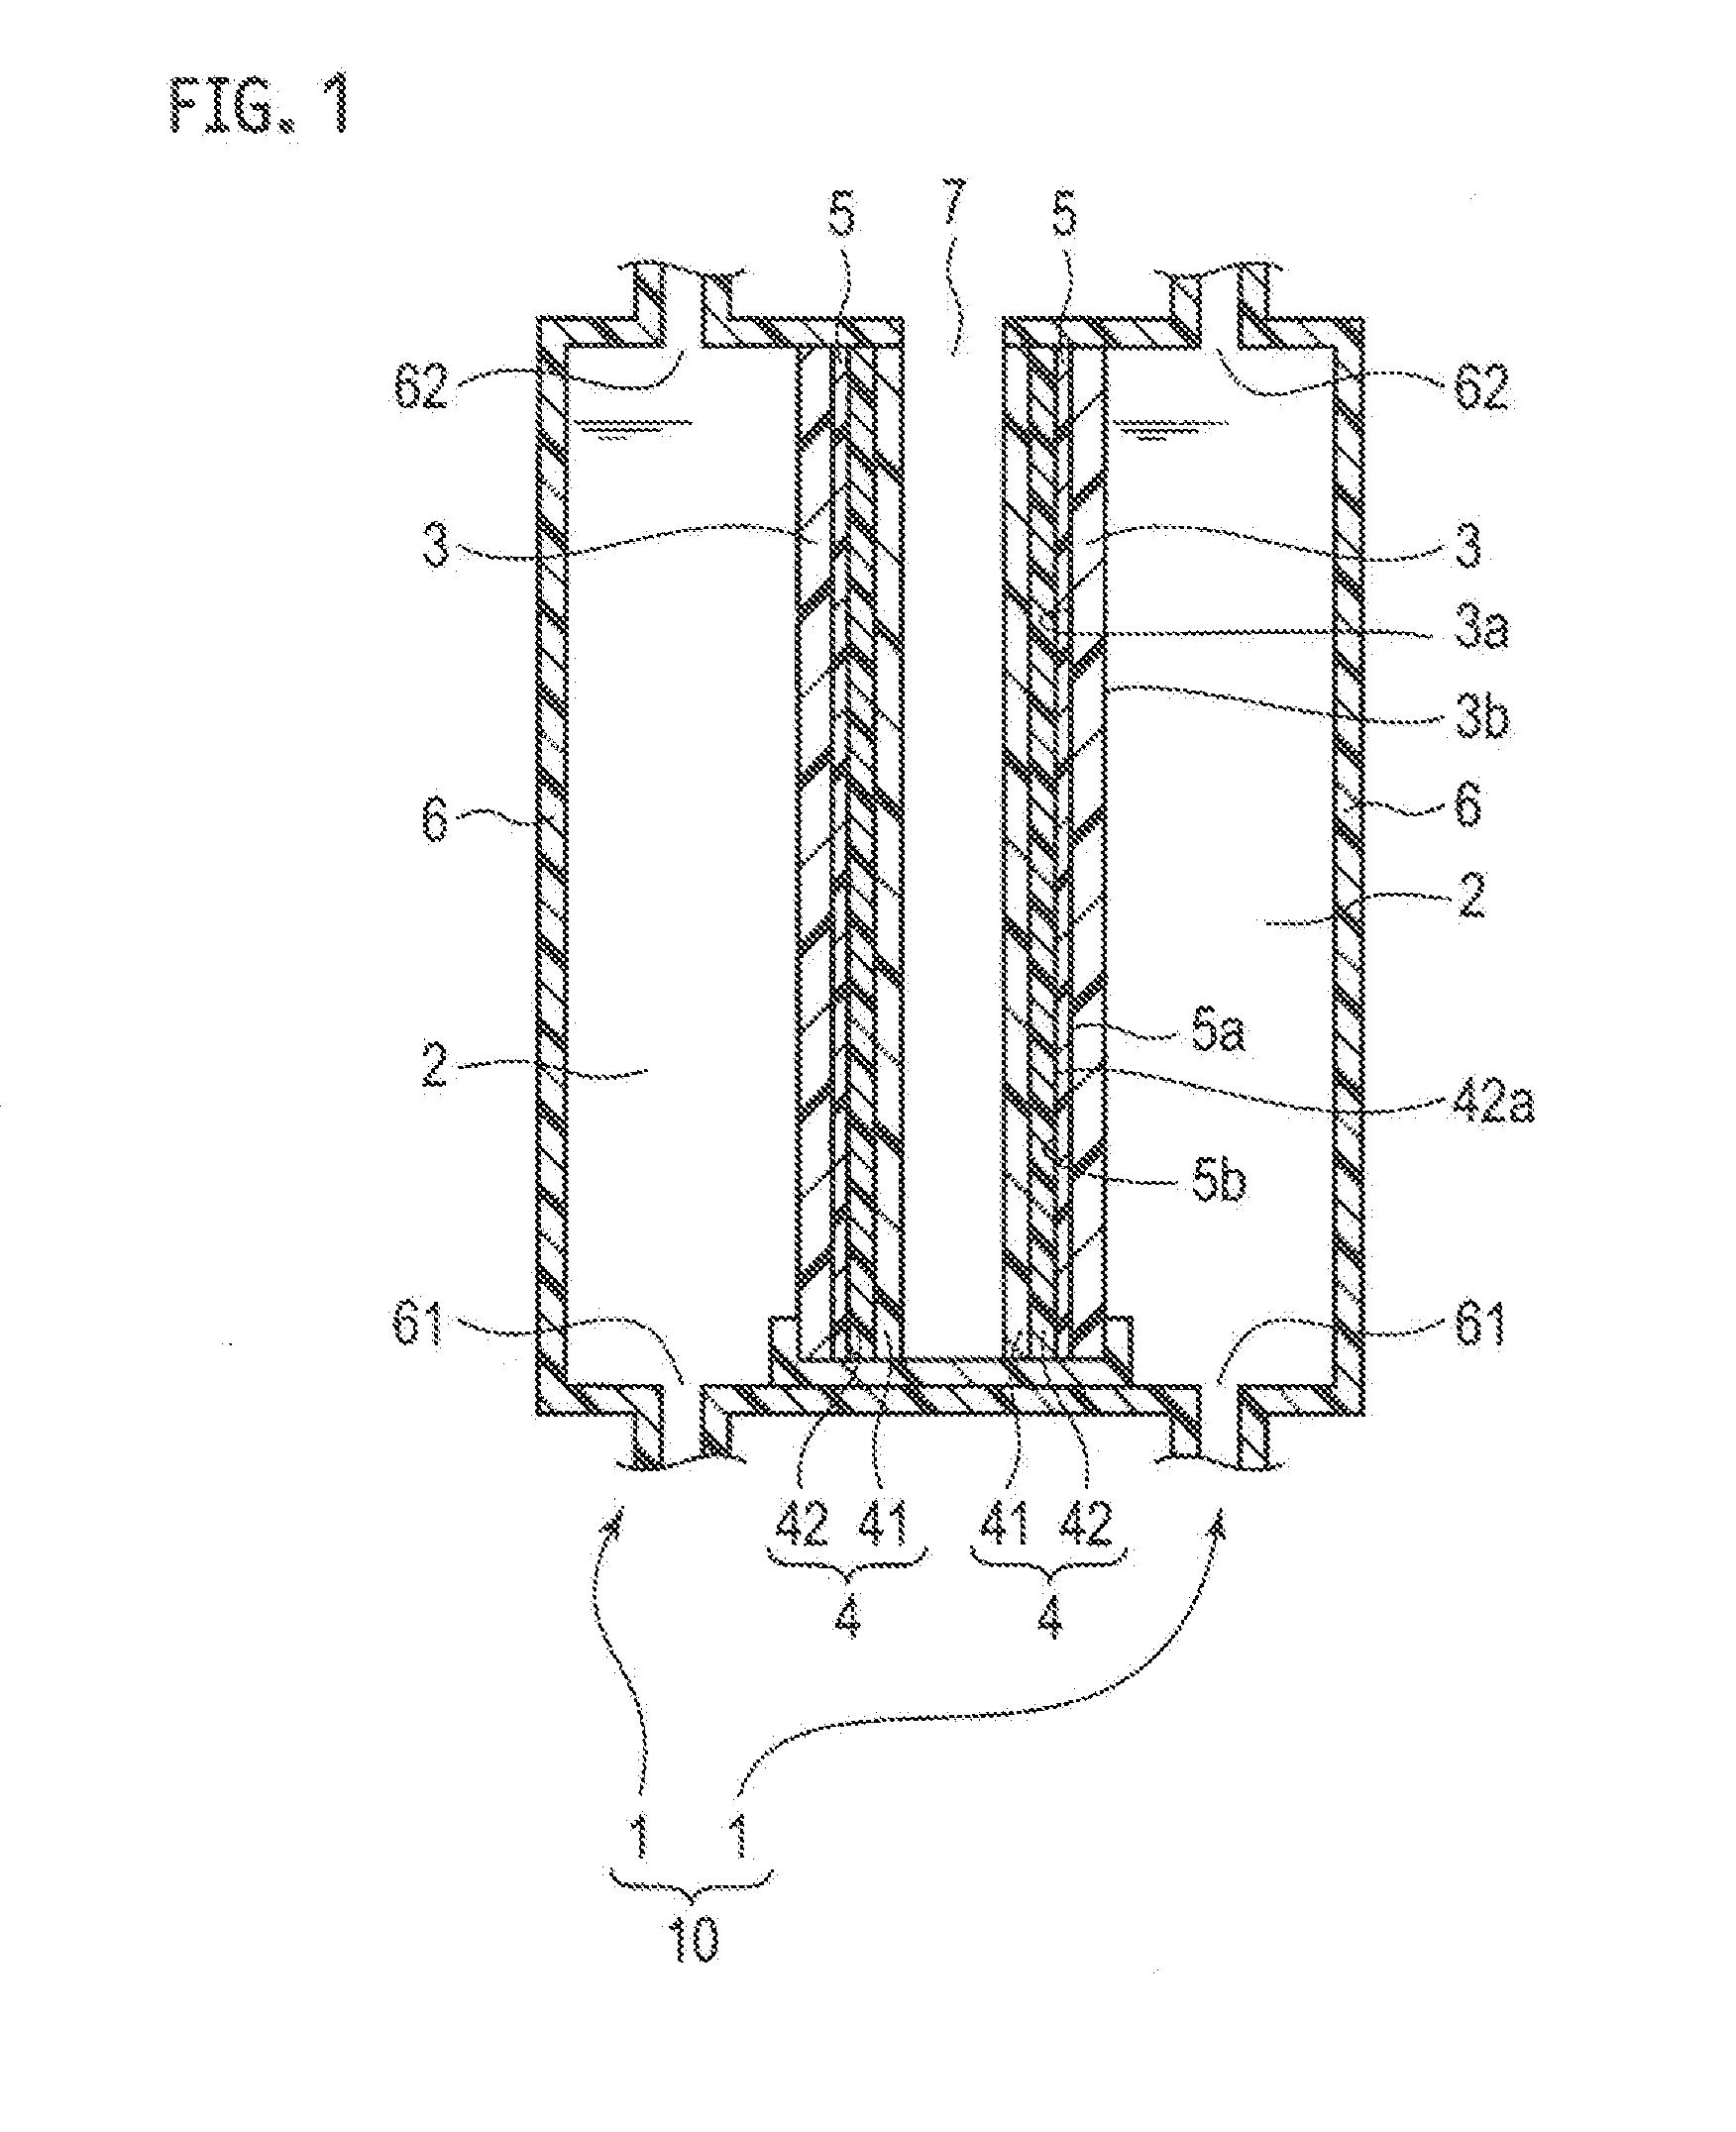 Microbial fuel cell, microbial fuel cell system, and method for using microbial fuel cell